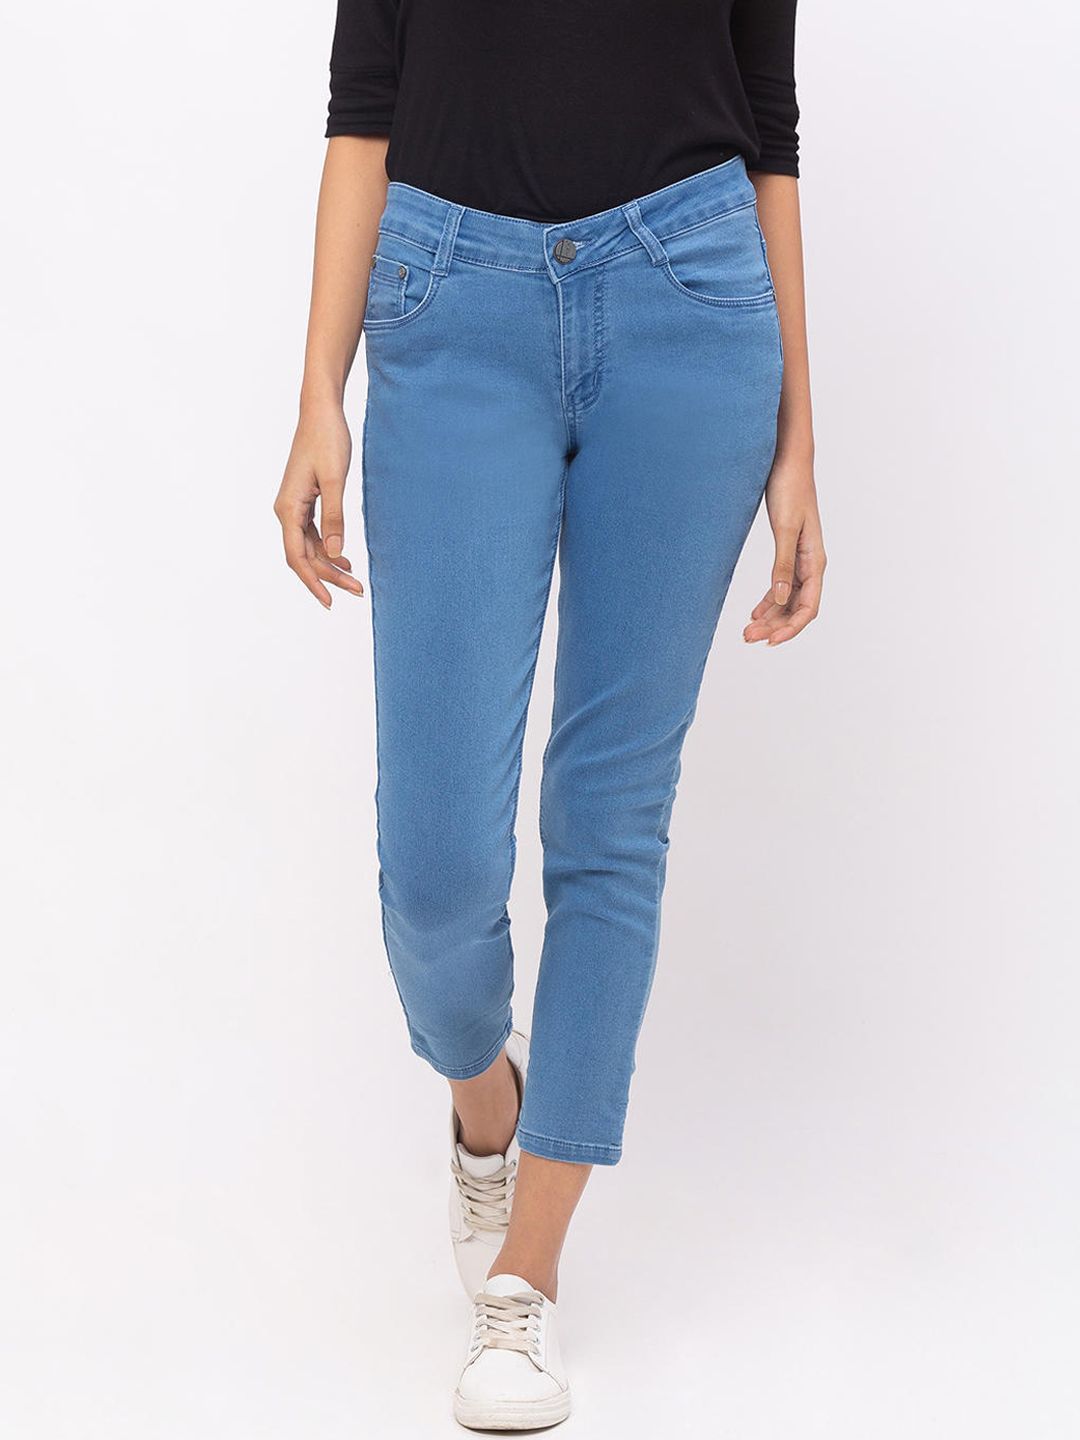 ZOLA Women Blue Slim Fit Mid-Rise Calf Length Jeans Price in India